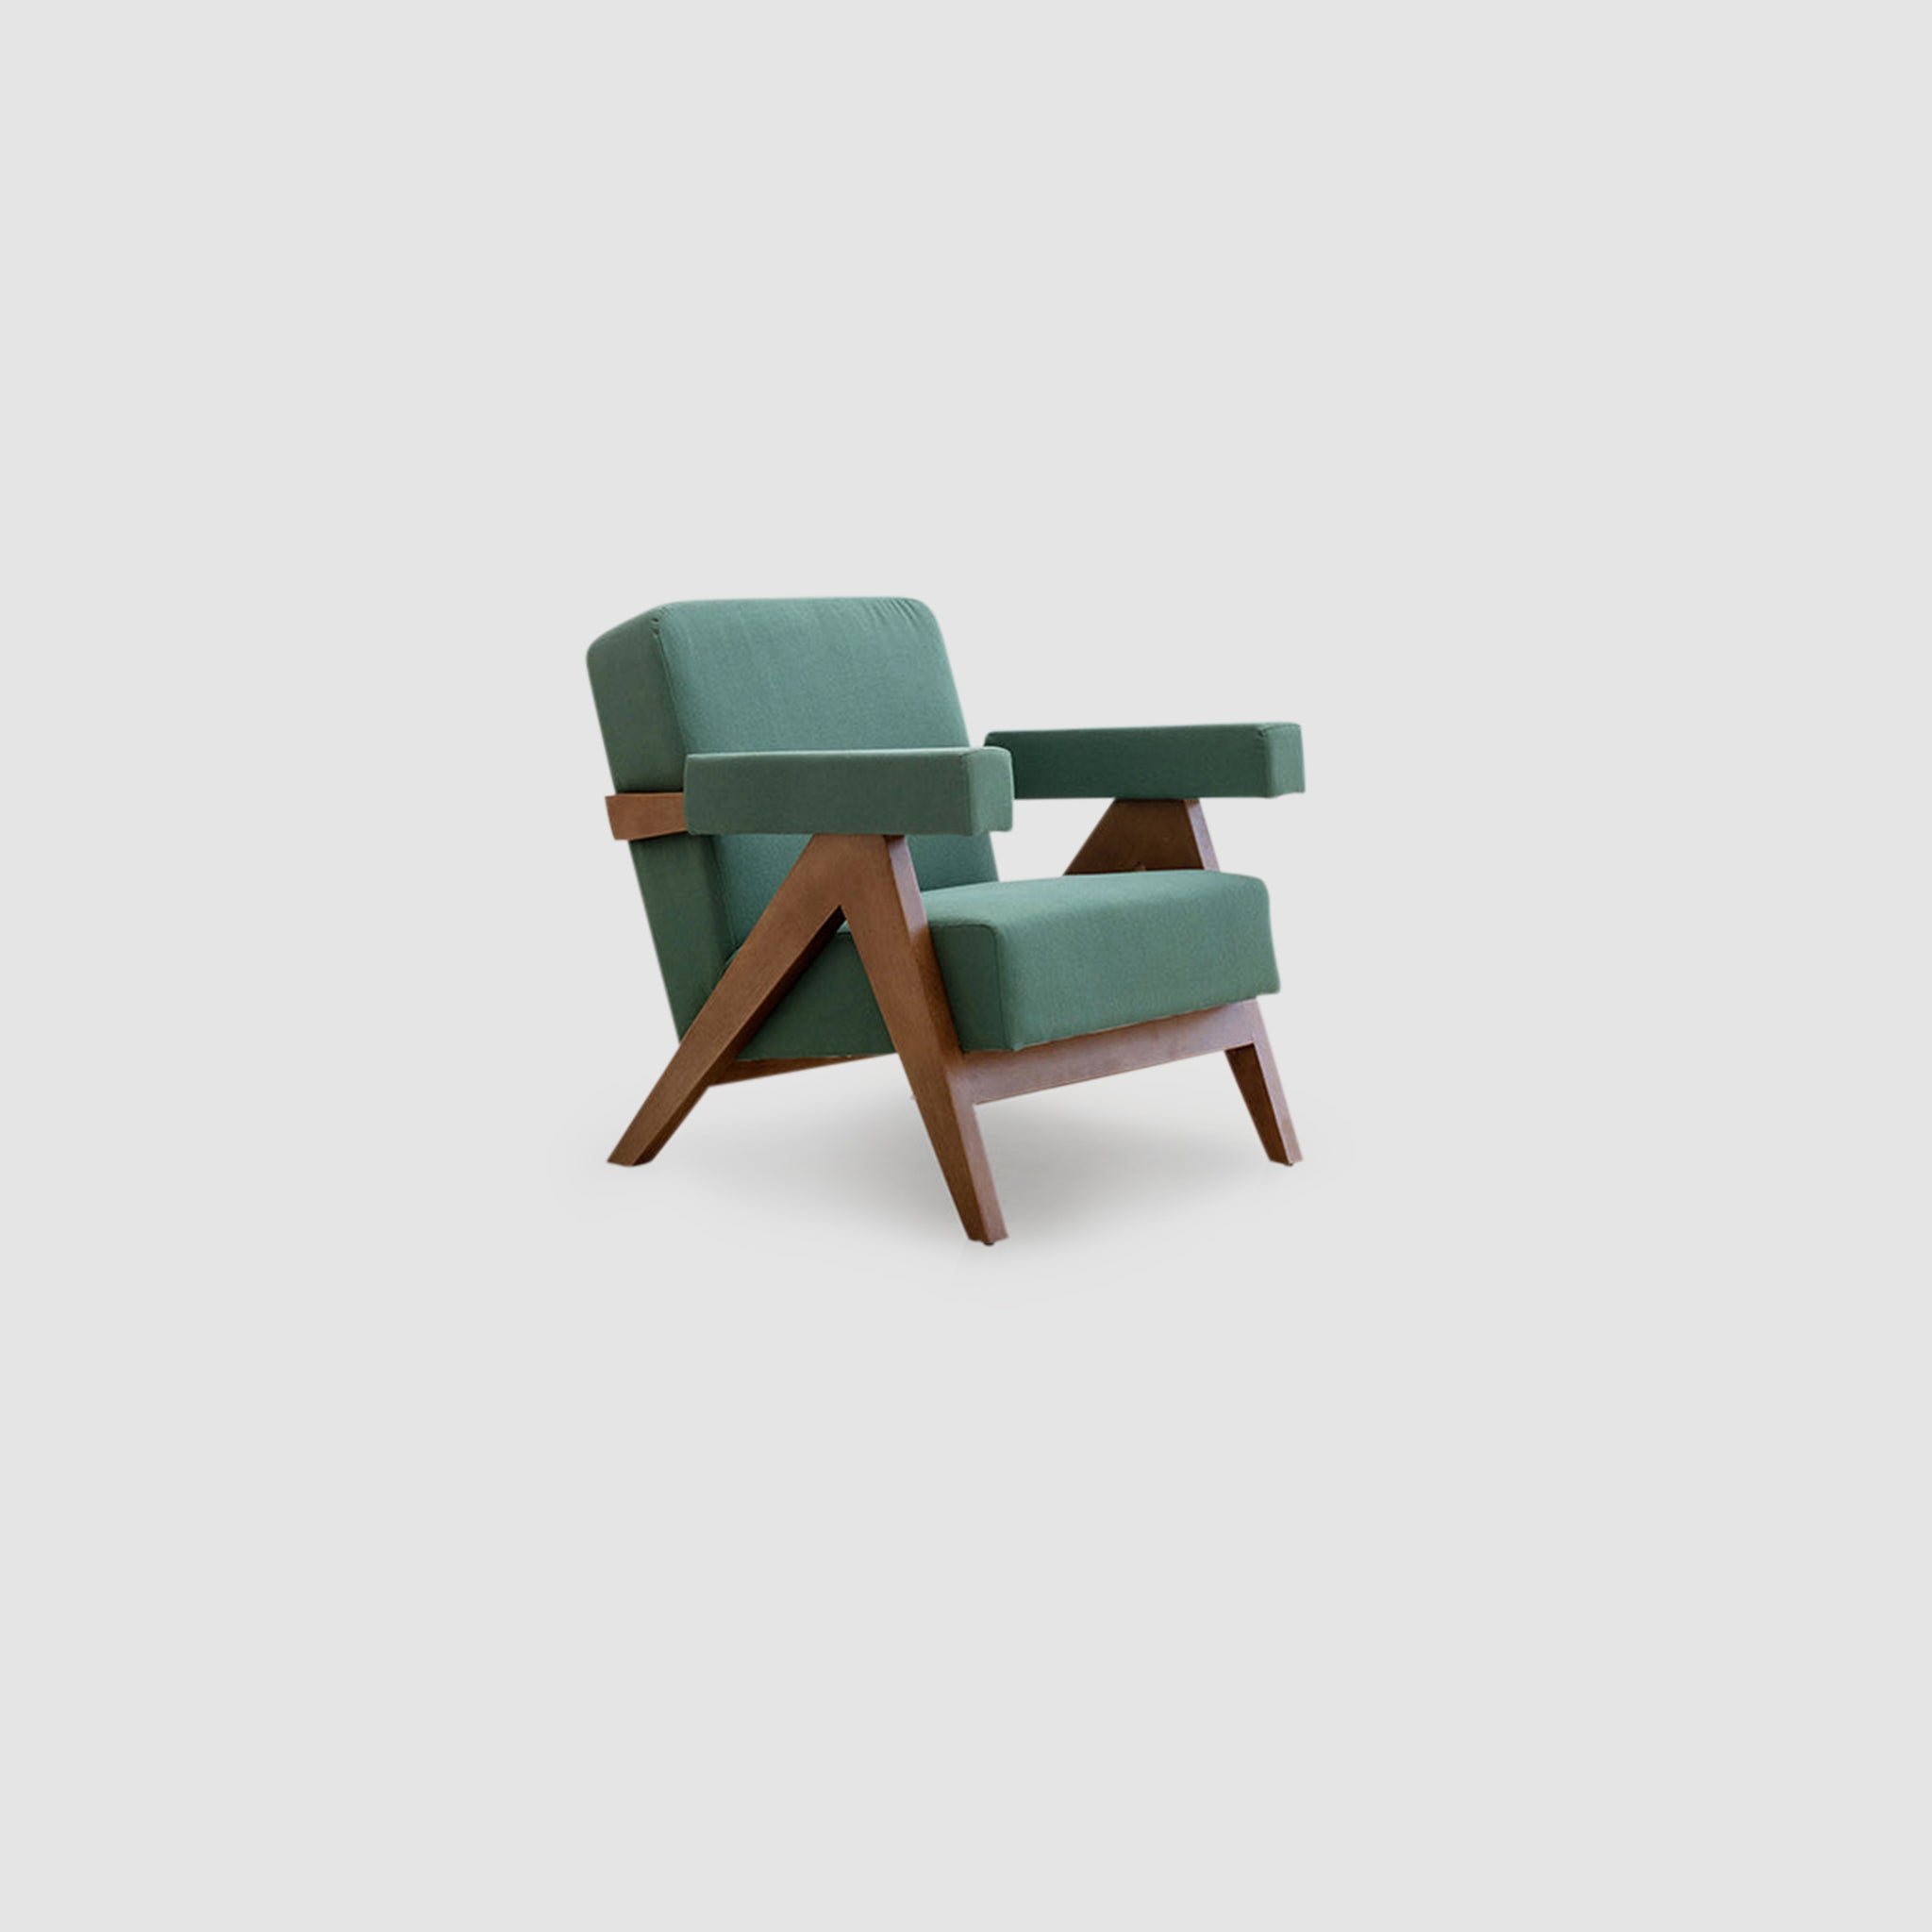 Modern design of The Pierre Accent Chair featuring teal fabric and wooden arms.